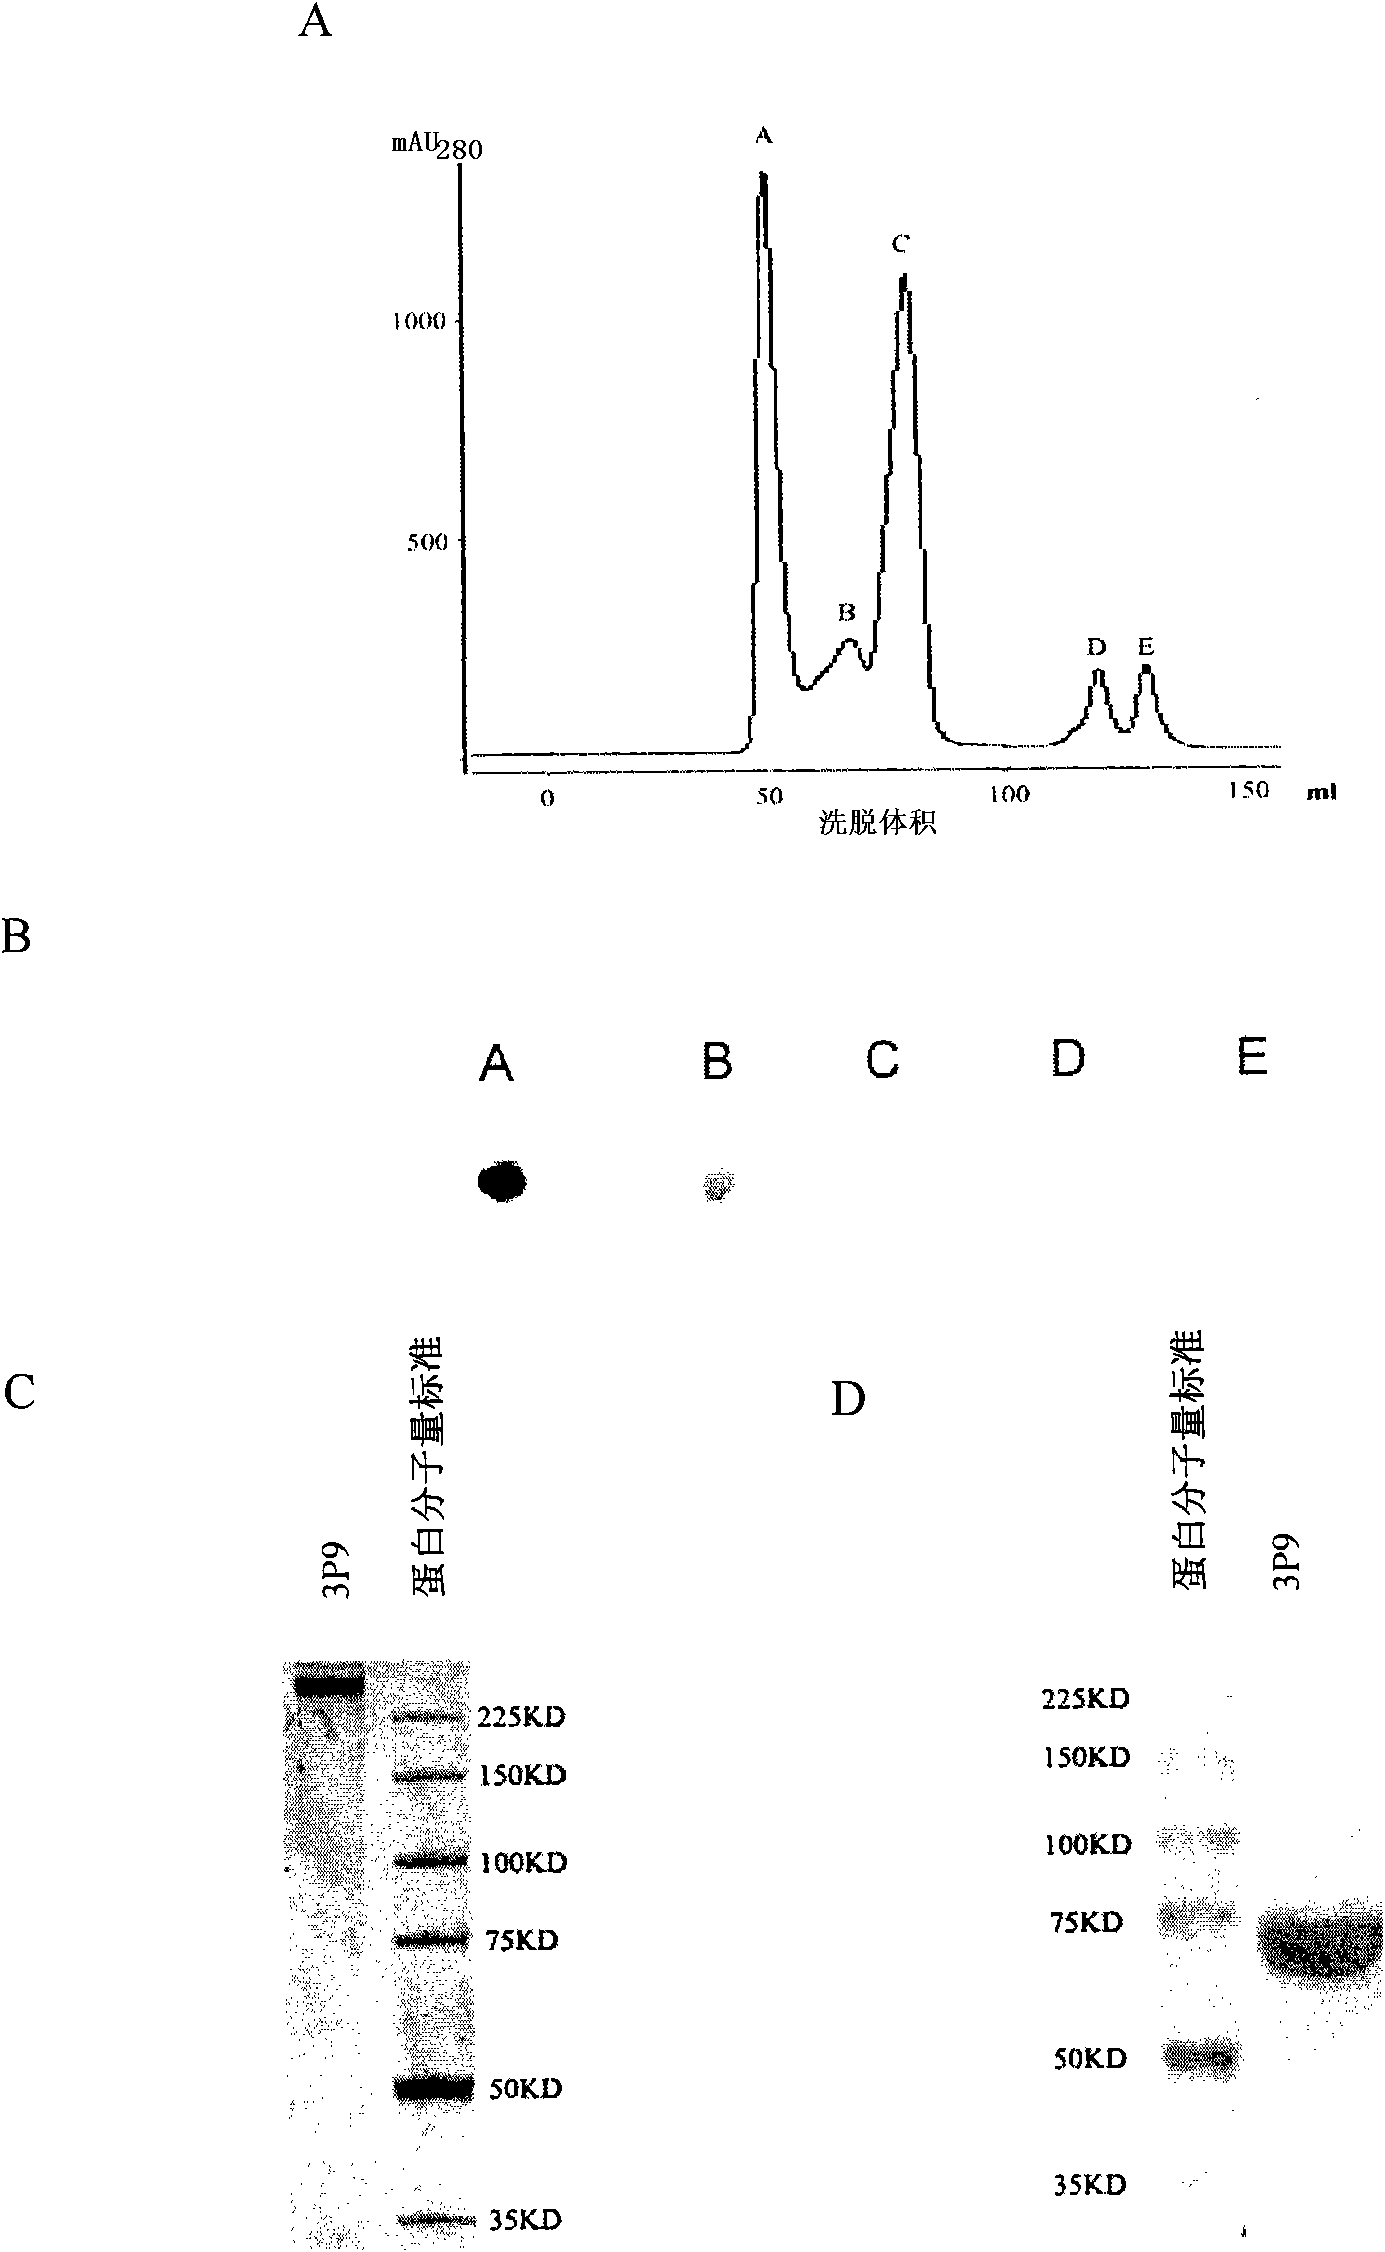 Antibody for inhibitting growth of colorectal carcinoma and its use in preparation of medicament and kit